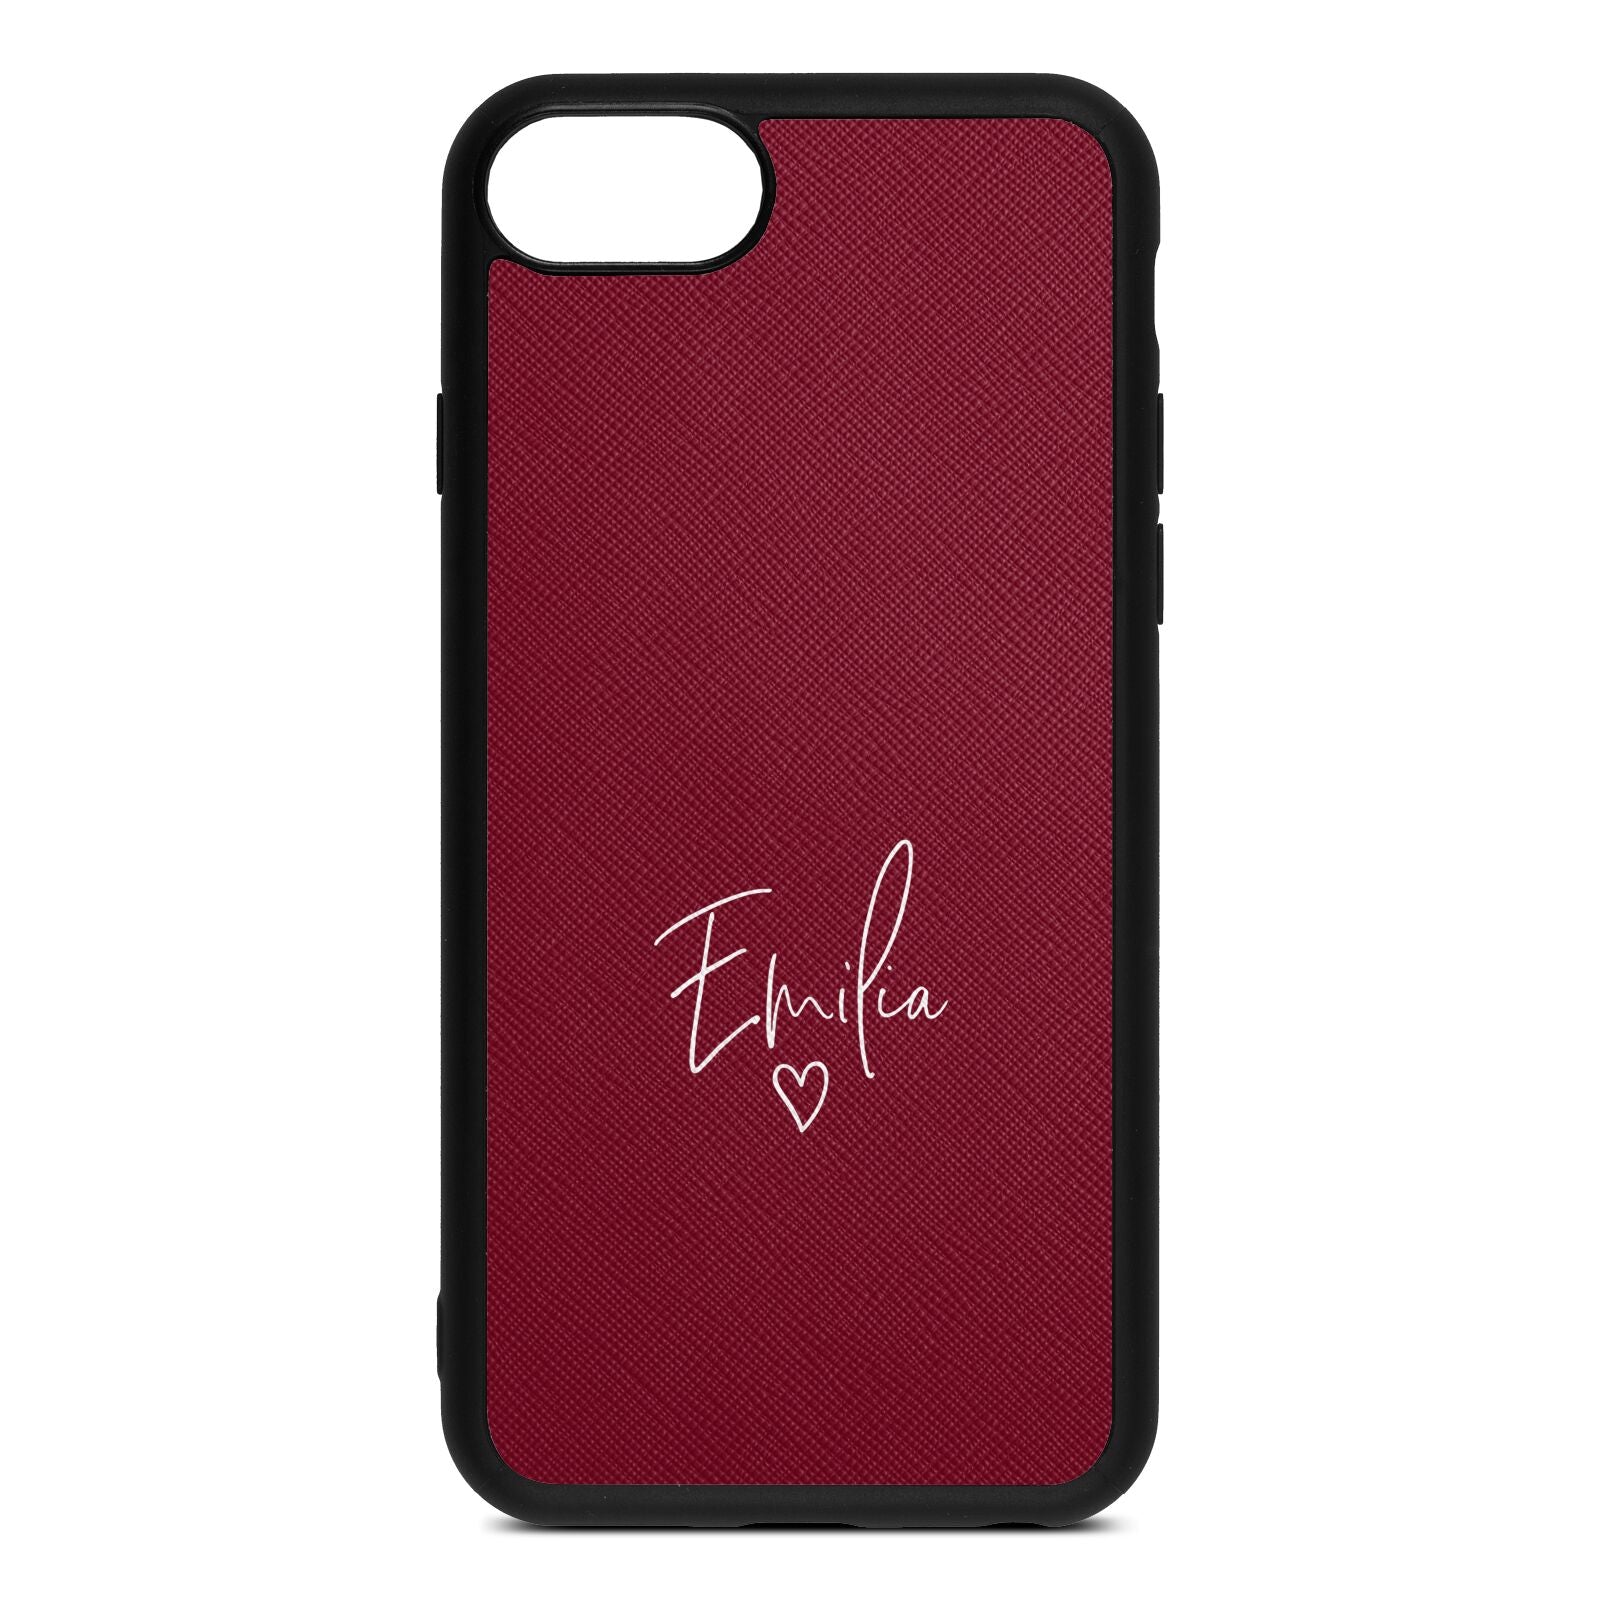 White Handwritten Name Transparent Wine Red Saffiano Leather iPhone 8 Case